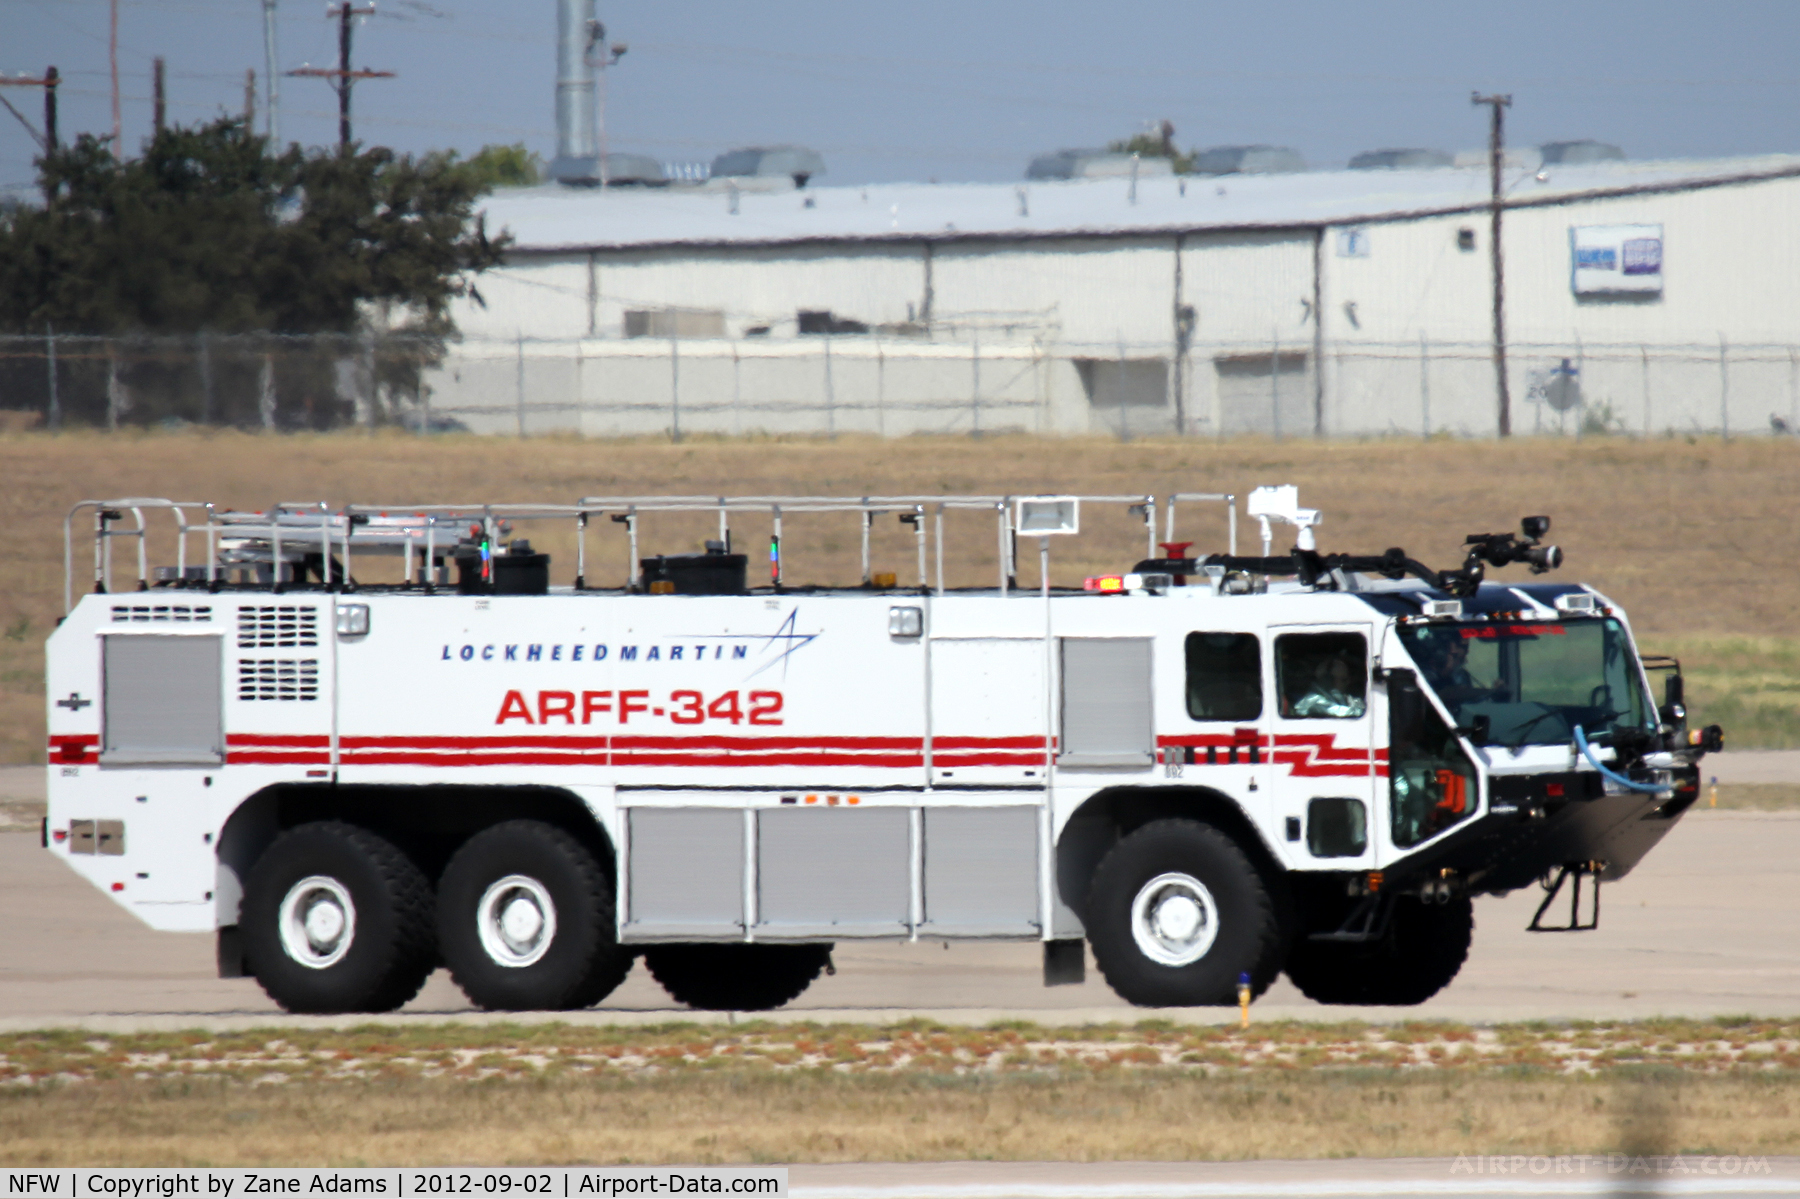 Fort Worth Nas Jrb/carswell Field Airport (NFW) - Lockheed Martin fire truck at NAS JRB Fort Worth